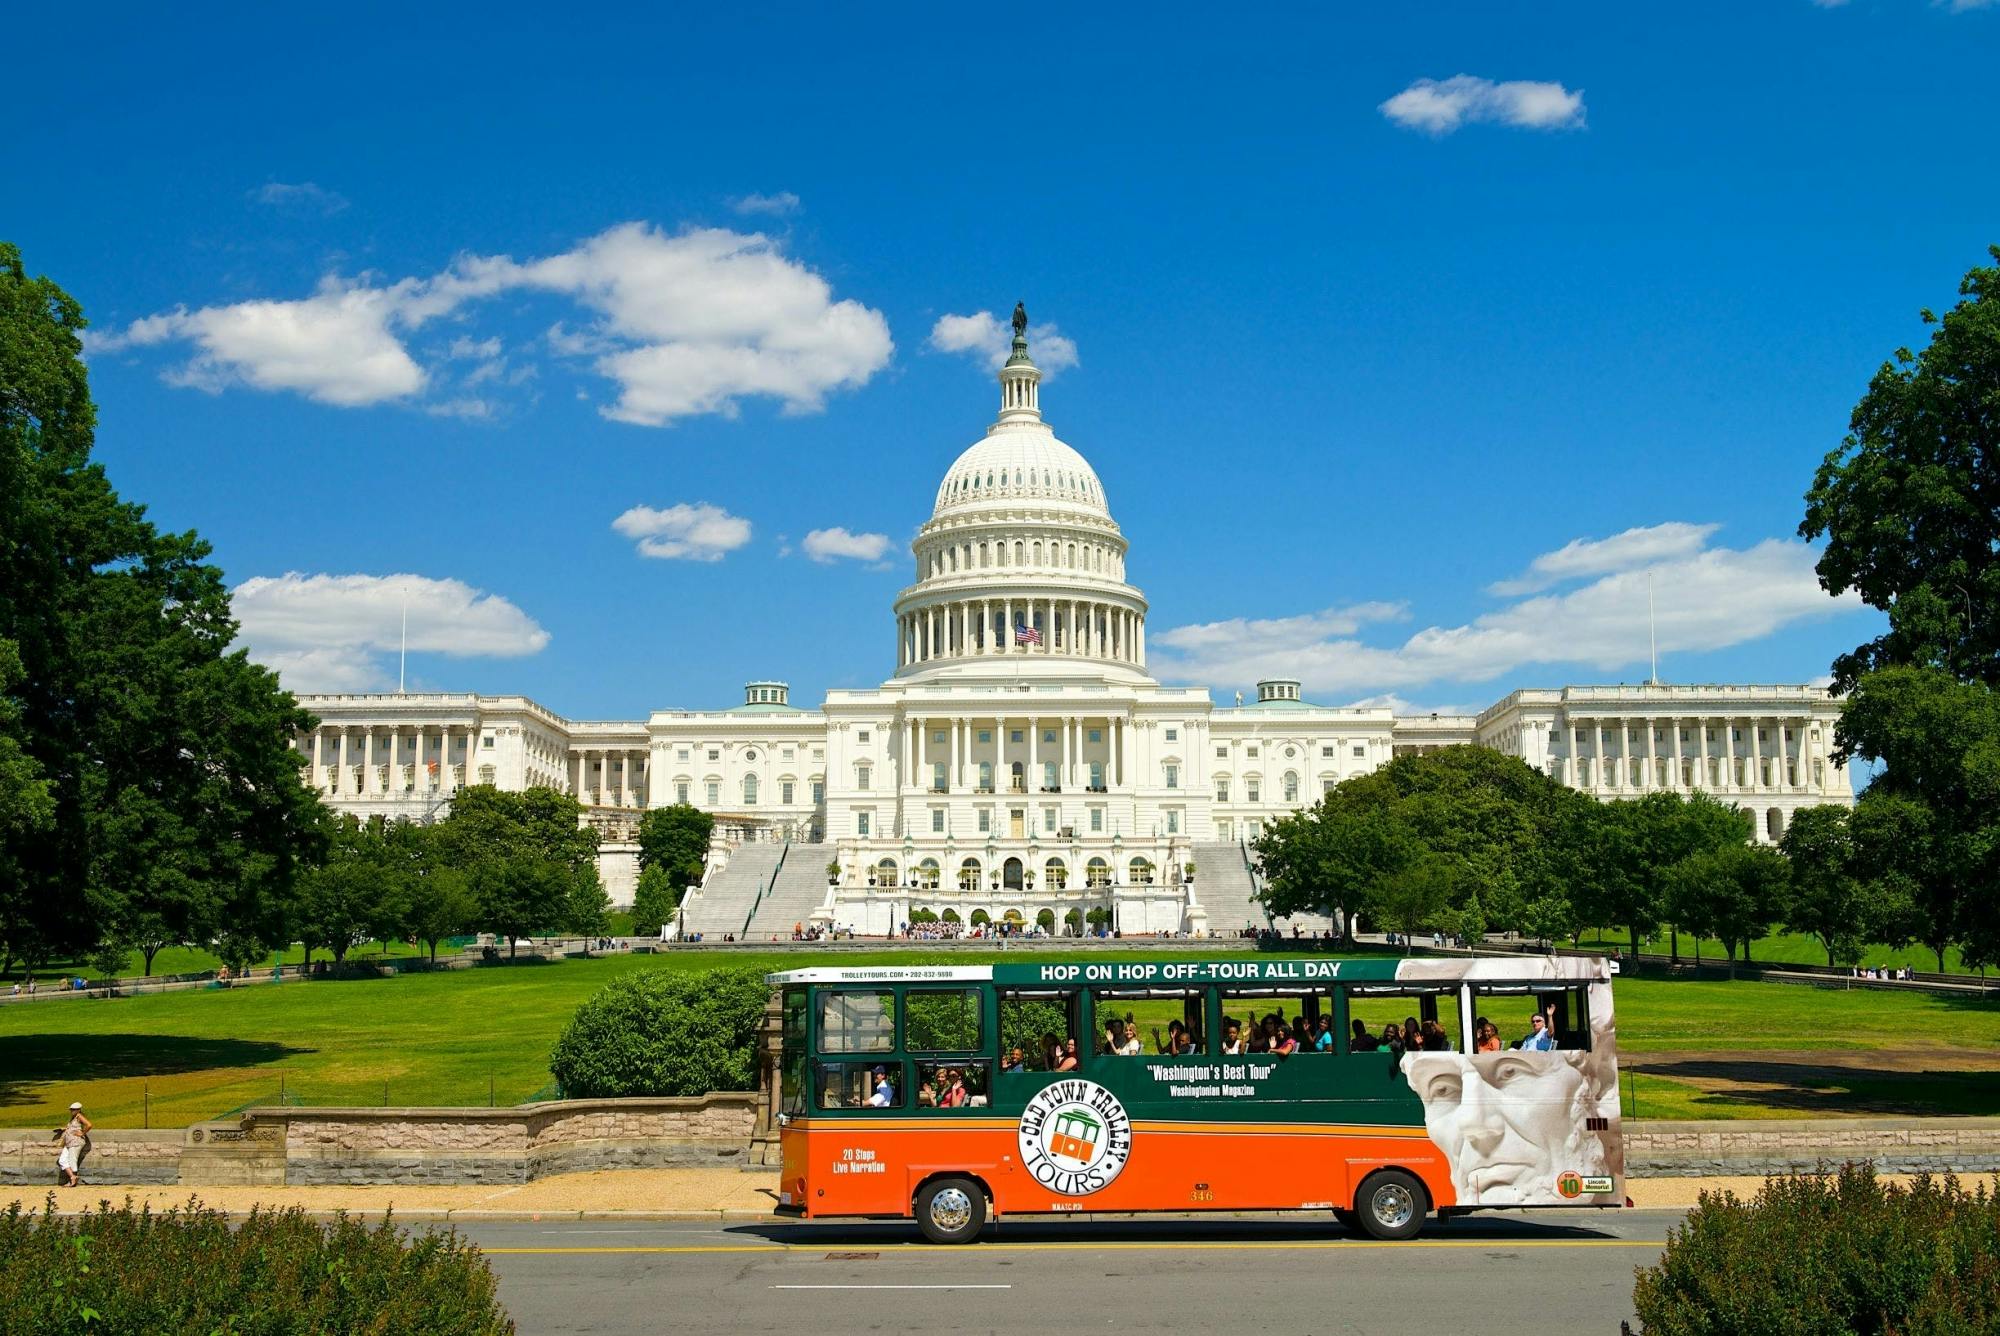 Old Town Trolley hop-on hop-off tours of Washington D.C.